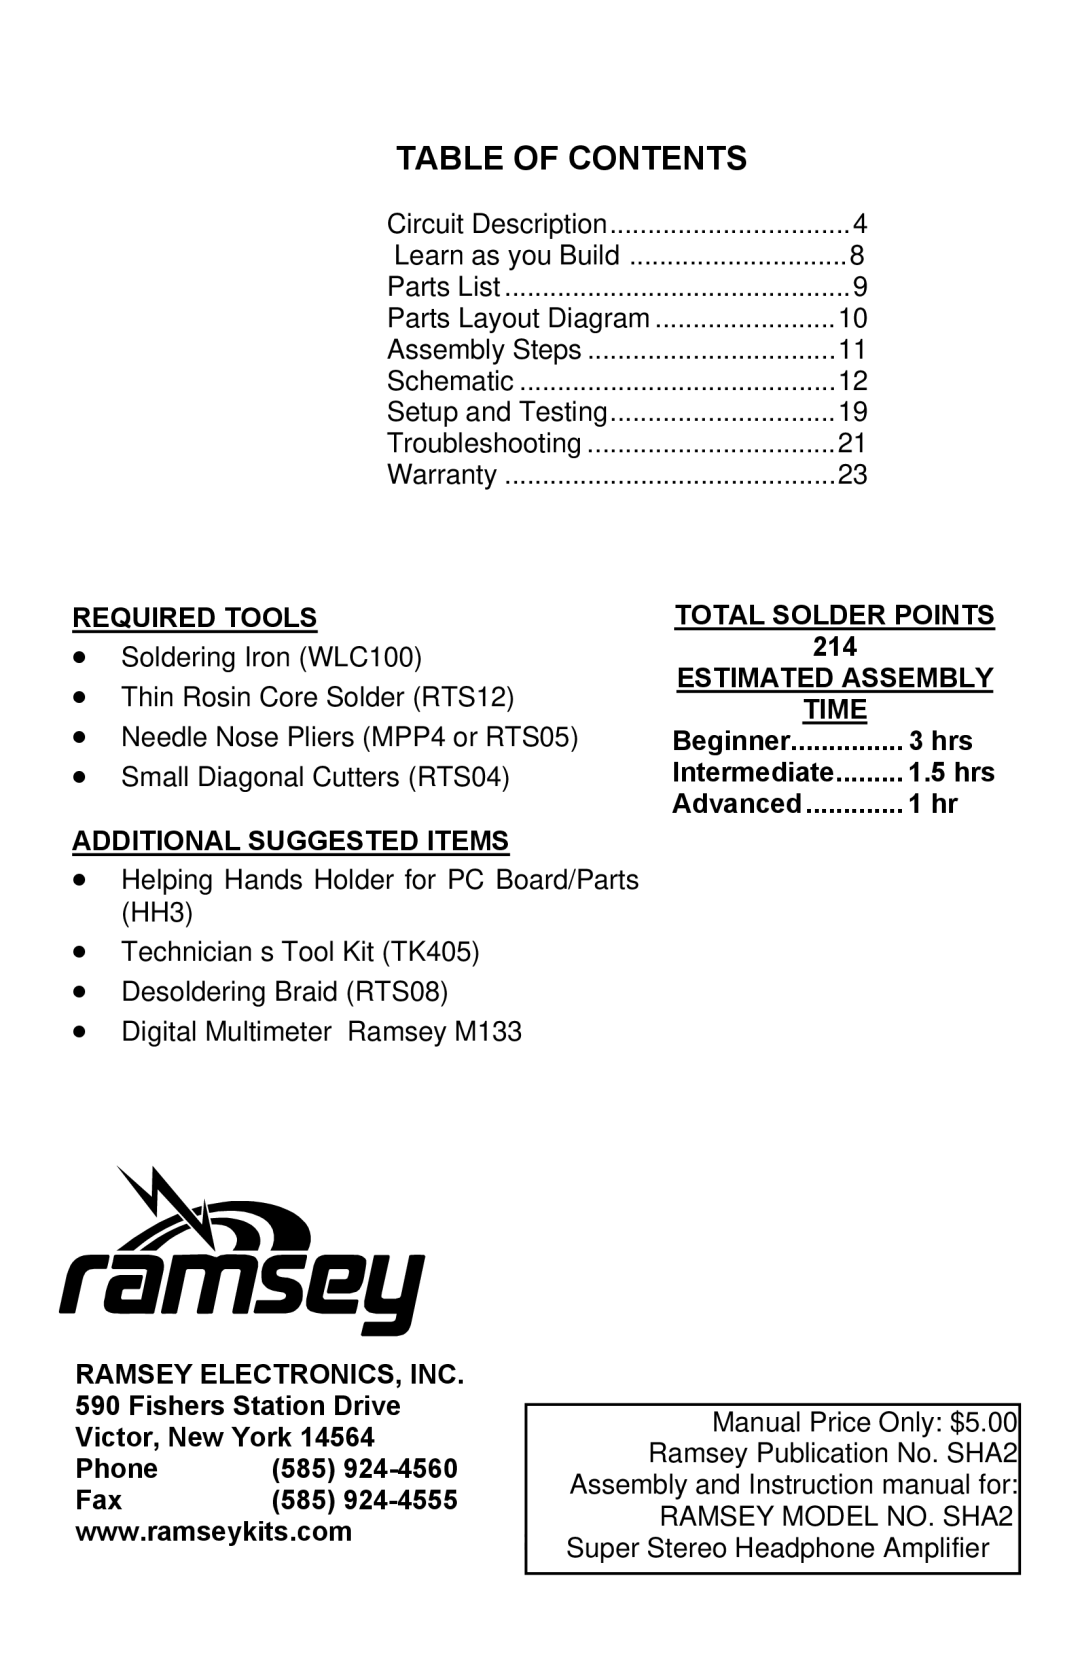 Ramsey Electronics SHA2 manual Required Tools, Additional Suggested Items, Total Solder Points, Estimated Assembly Time 